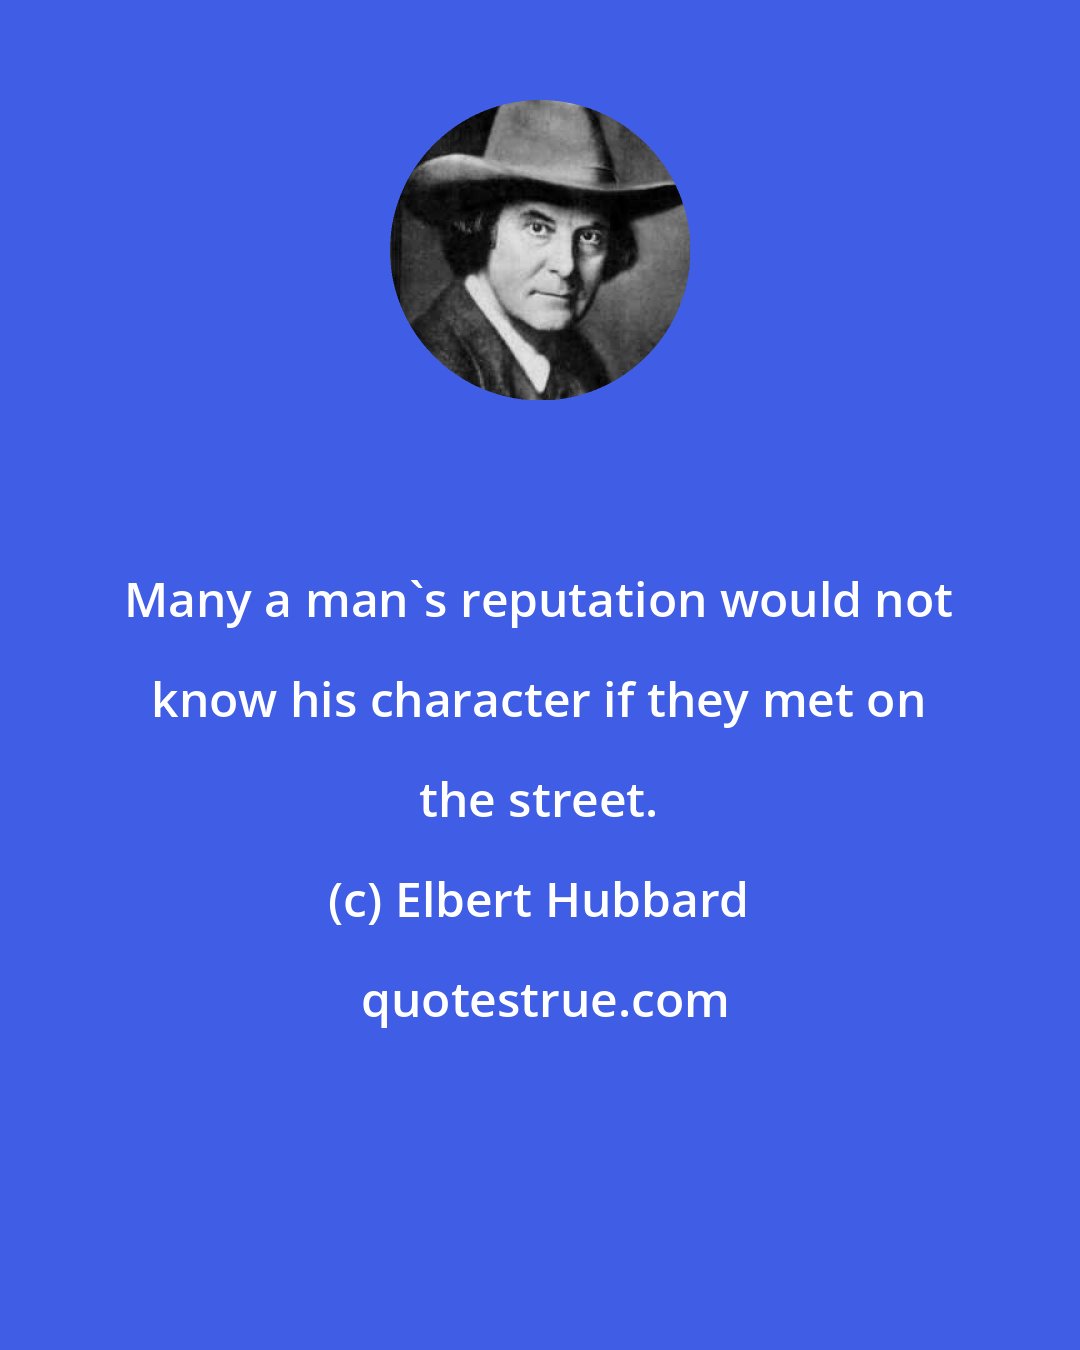 Elbert Hubbard: Many a man's reputation would not know his character if they met on the street.